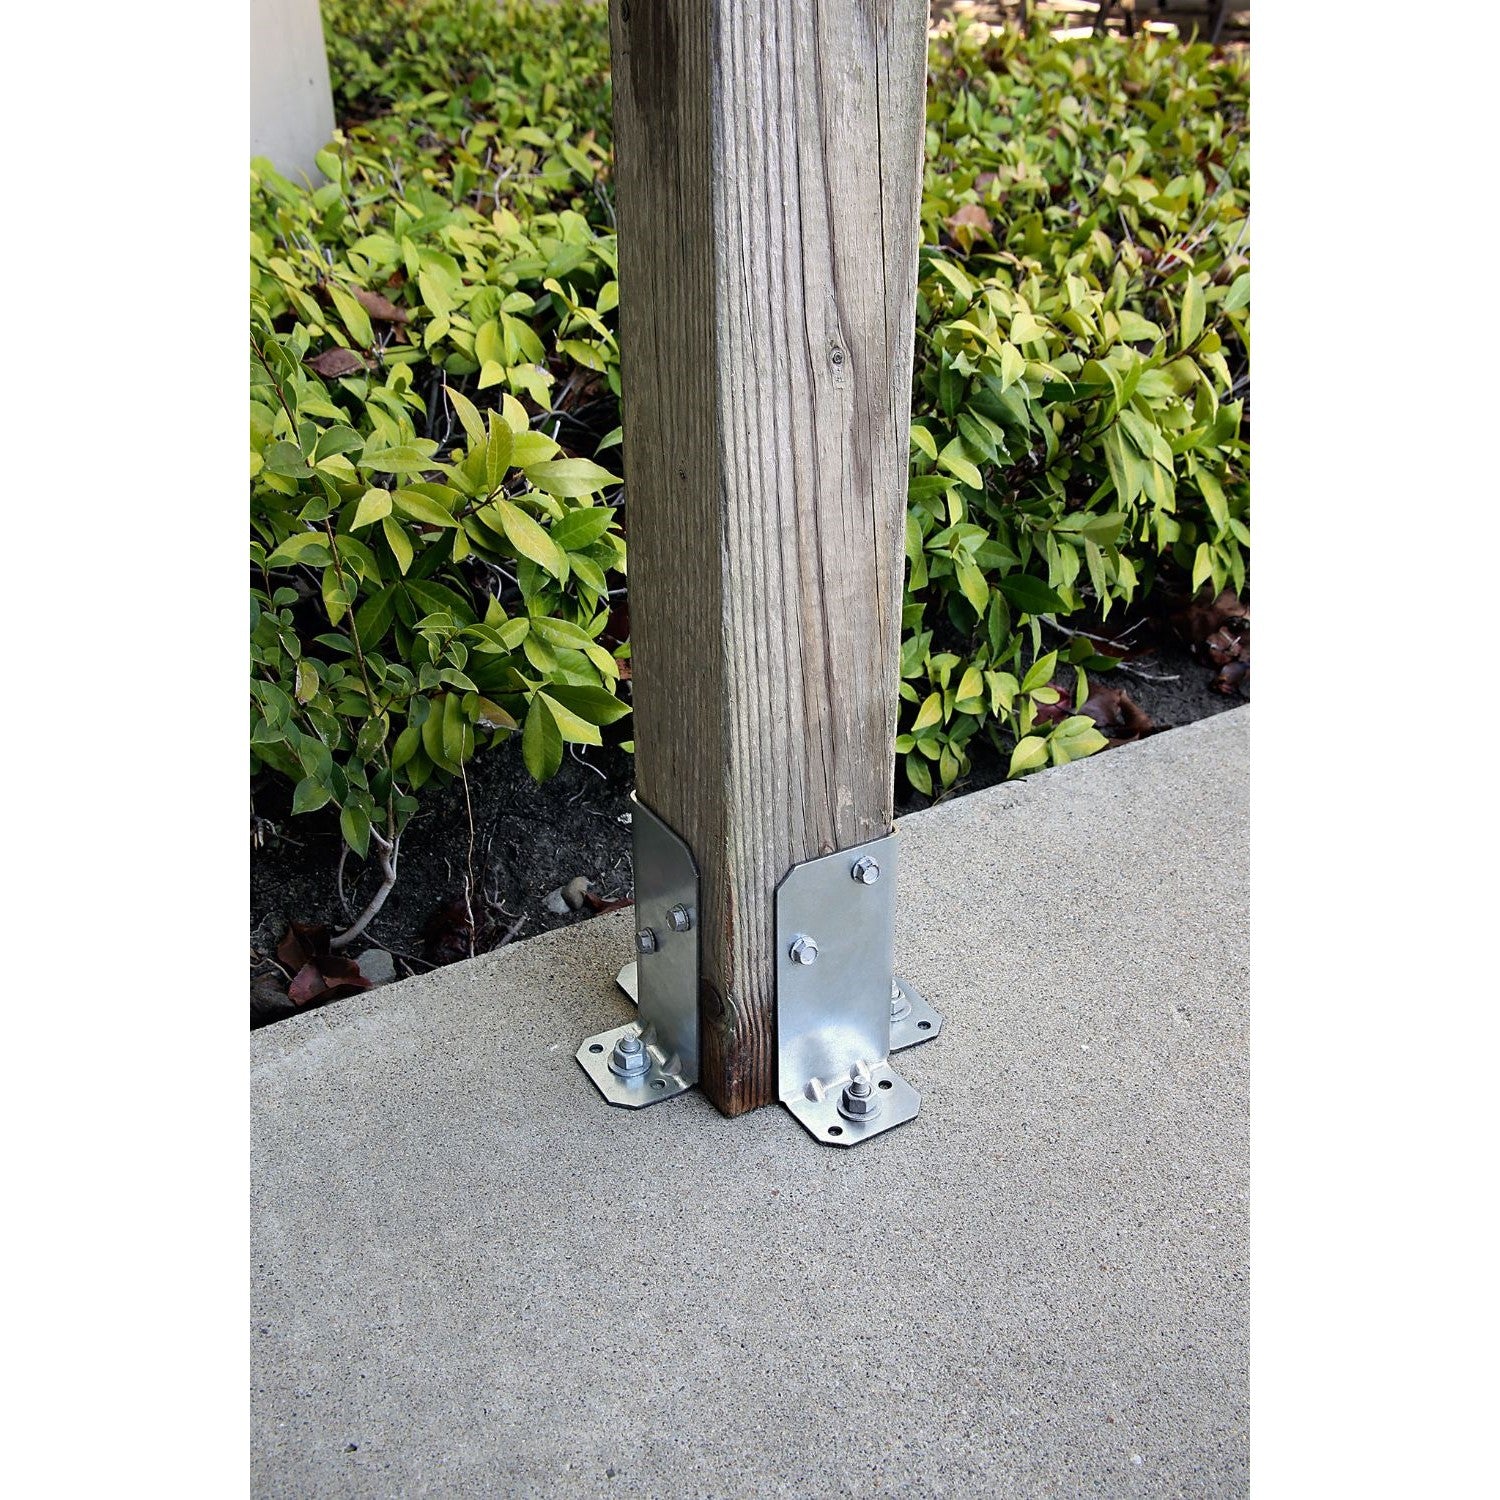 Simpson Strong-Tie FPBB44 - Base Black Post Base for 4x4